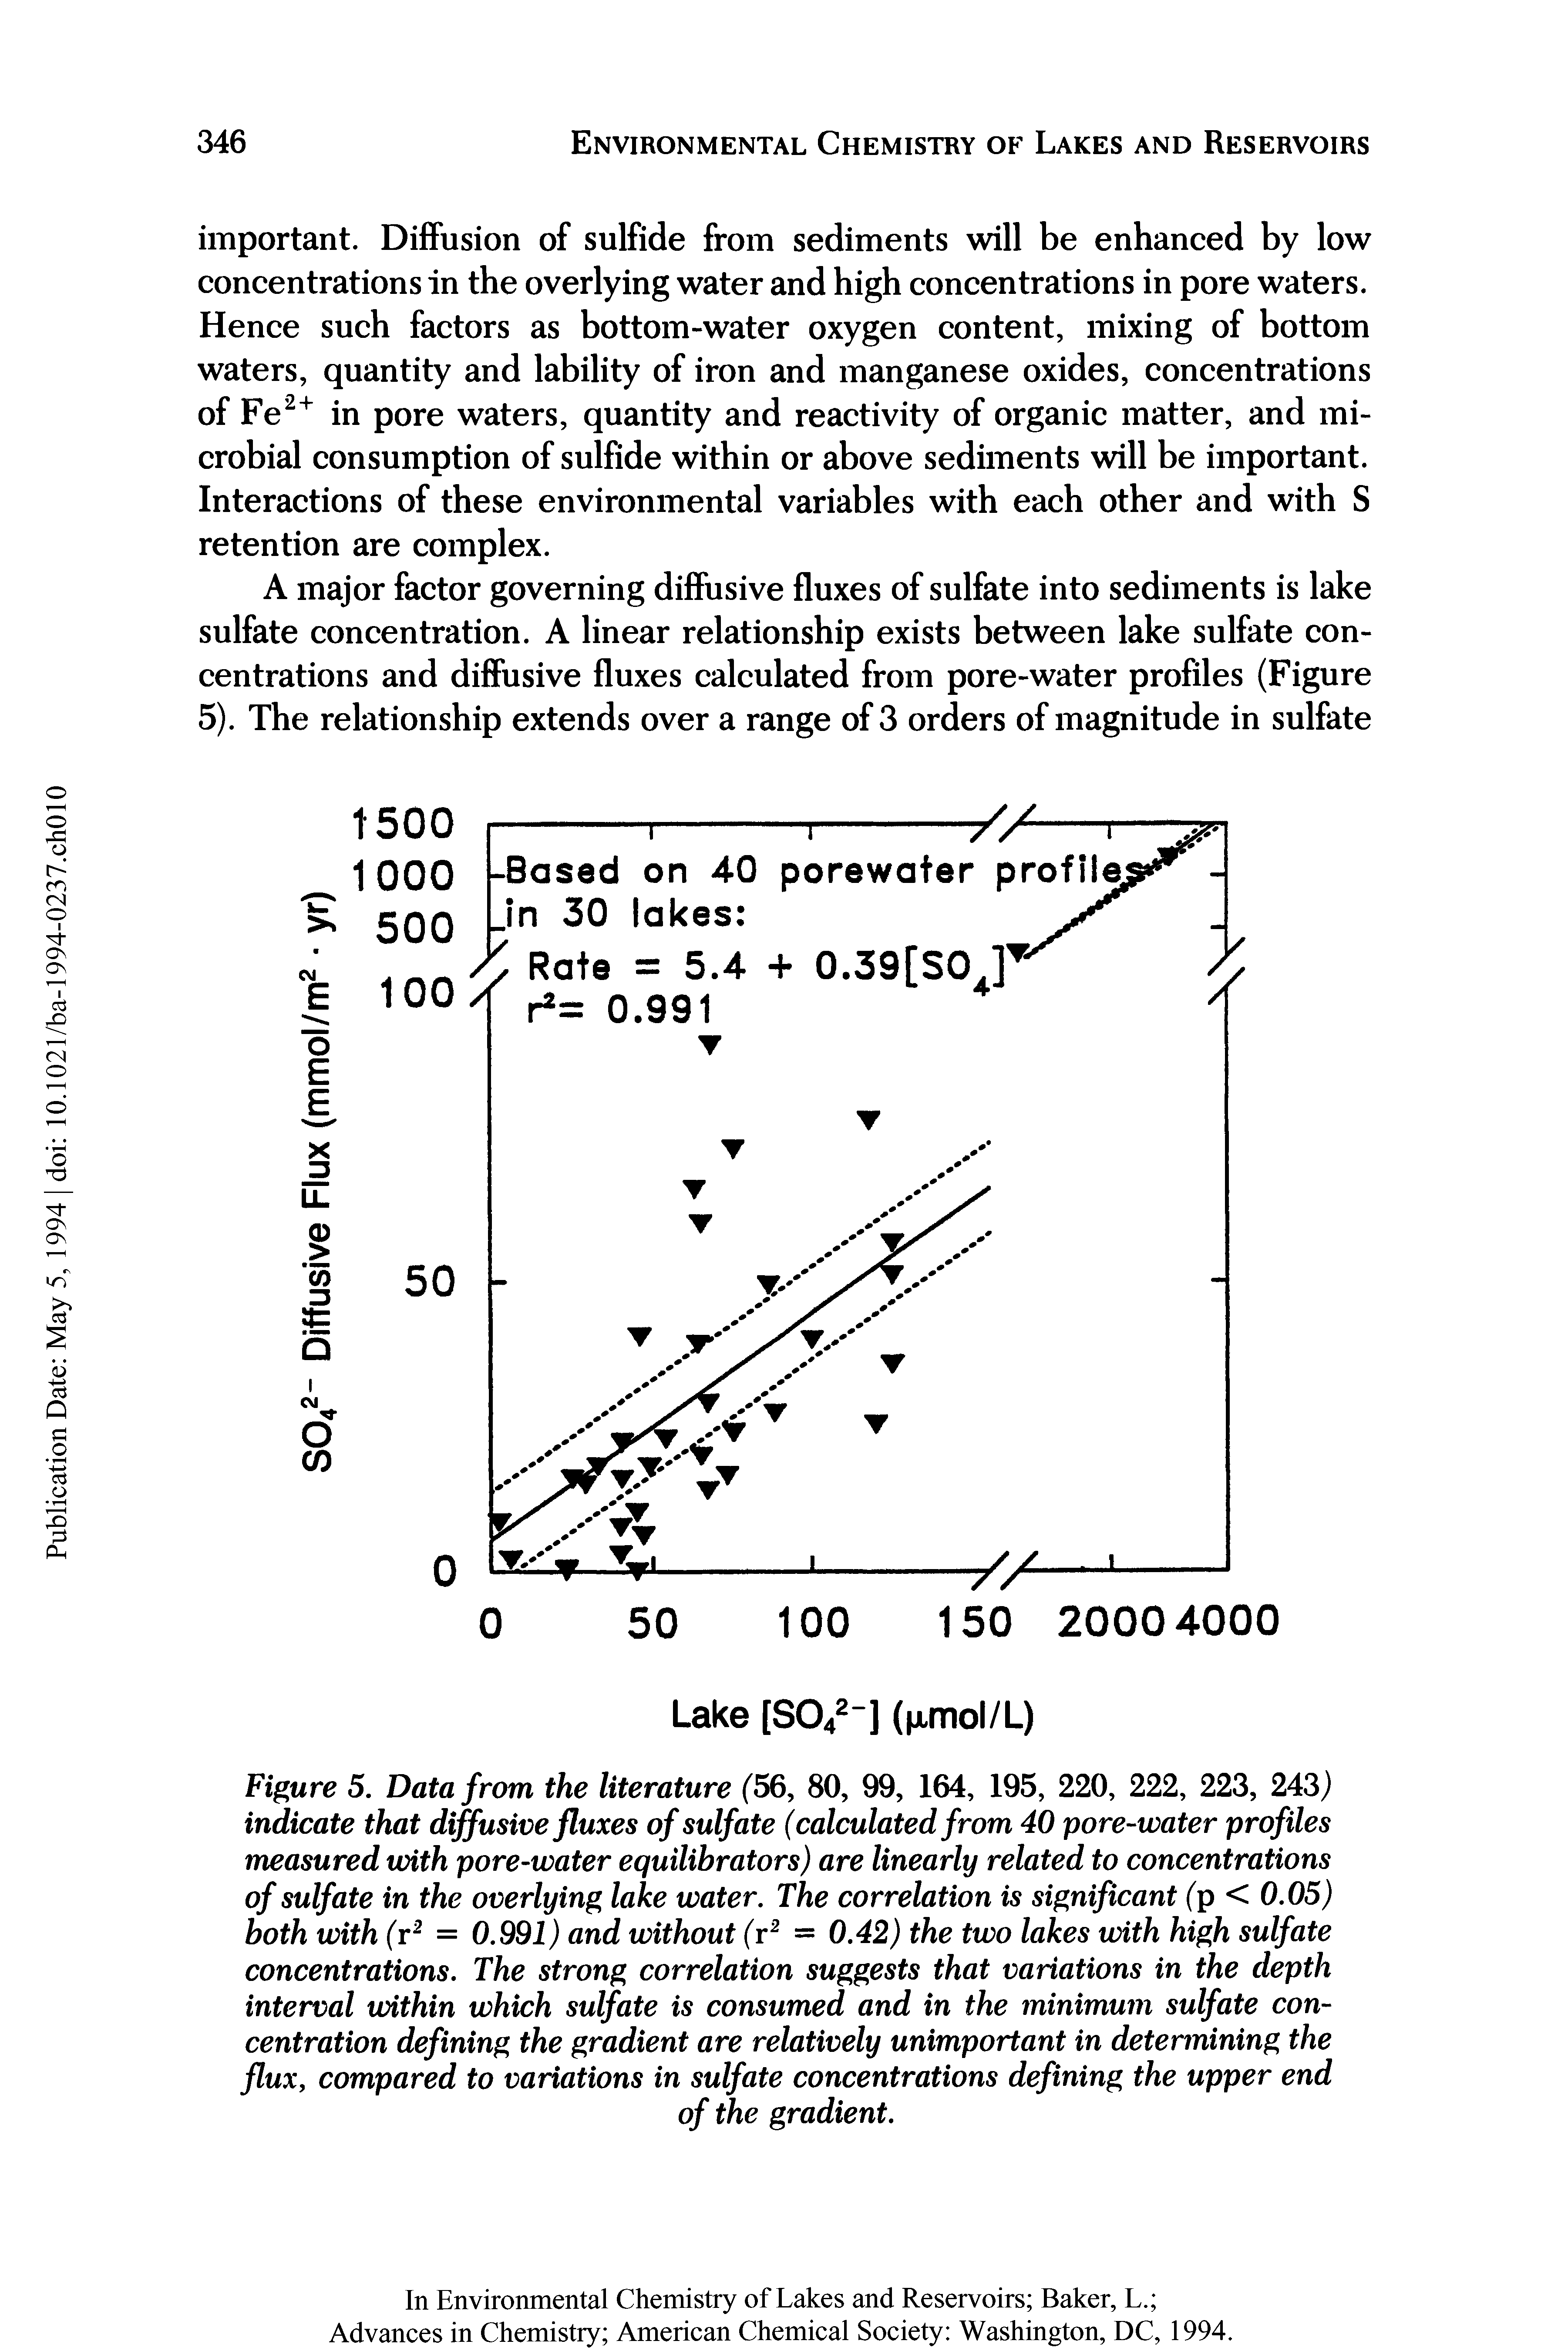 Figure 5. Data from the literature (56, 80, 99, 164, 195, 220, 222, 223, 243) indicate that diffusive fluxes of sulfate (calculated from 40 pore-water profiles measured with pore-water equilibrators) are linearly related to concentrations of sulfate in the overlying lake water. The correlation is significant (p < 0.05) both with (r2 = 0.991) and without (r2 = 0.42) the two lakes with high sulfate concentrations. The strong correlation suggests that variations in the depth interval within which sulfate is consumed and in the minimum sulfate concentration defining the gradient are relatively unimportant in determining the flux, compared to variations in sulfate concentrations defining the upper end...